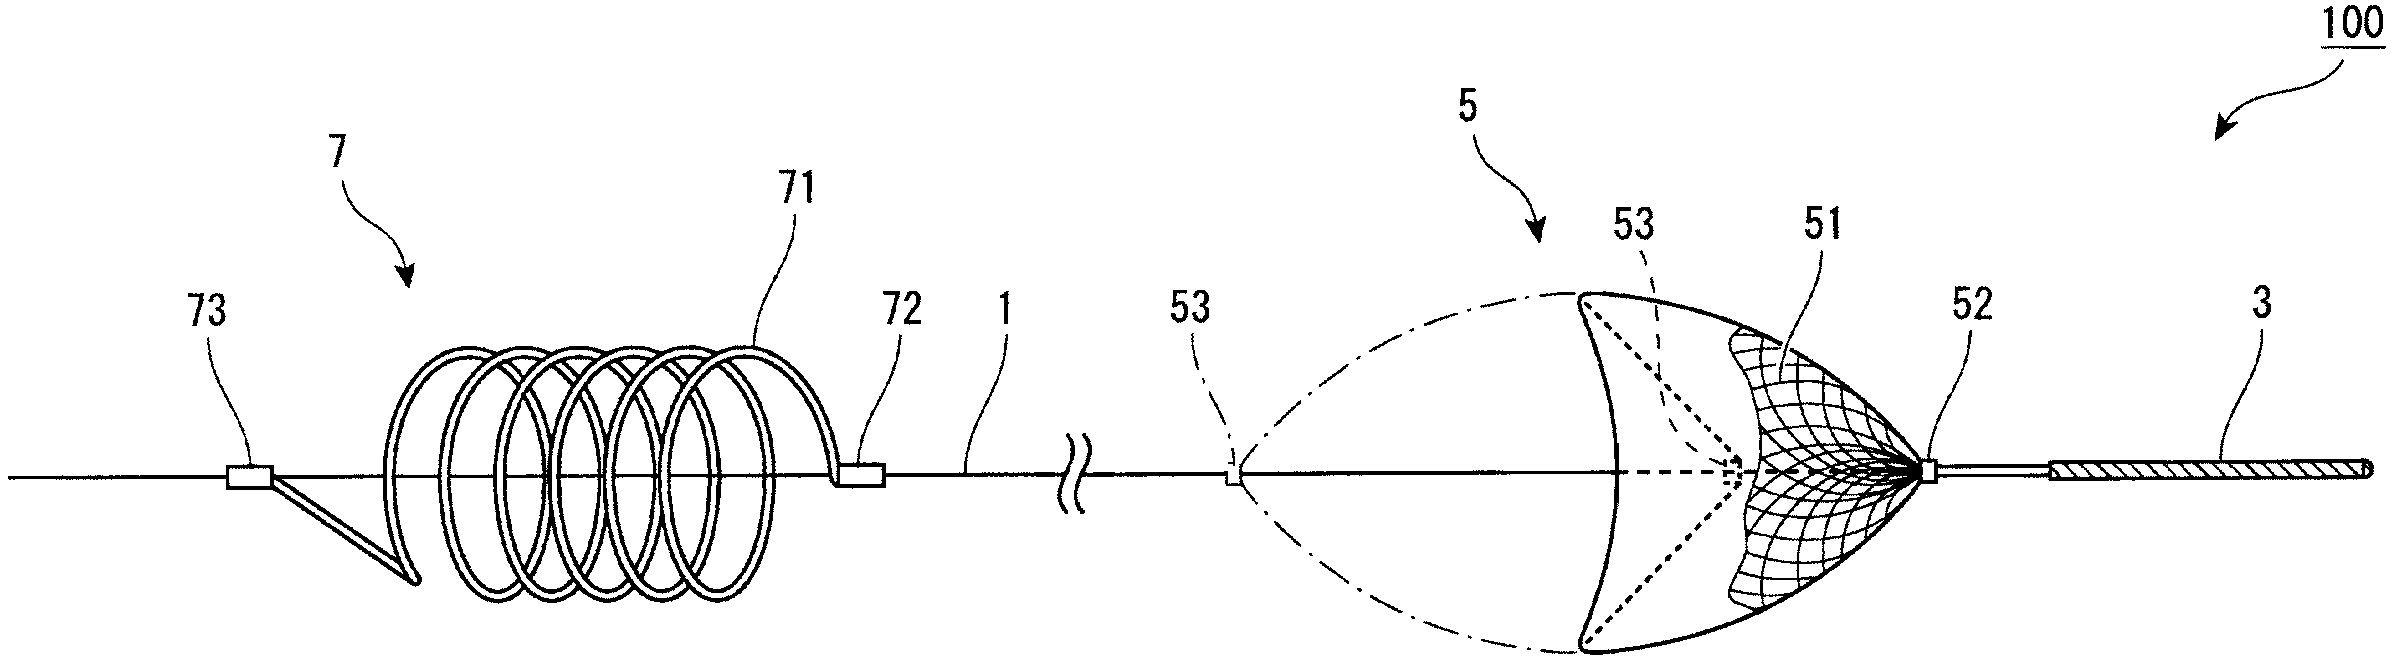 Embolic material excision trapping device